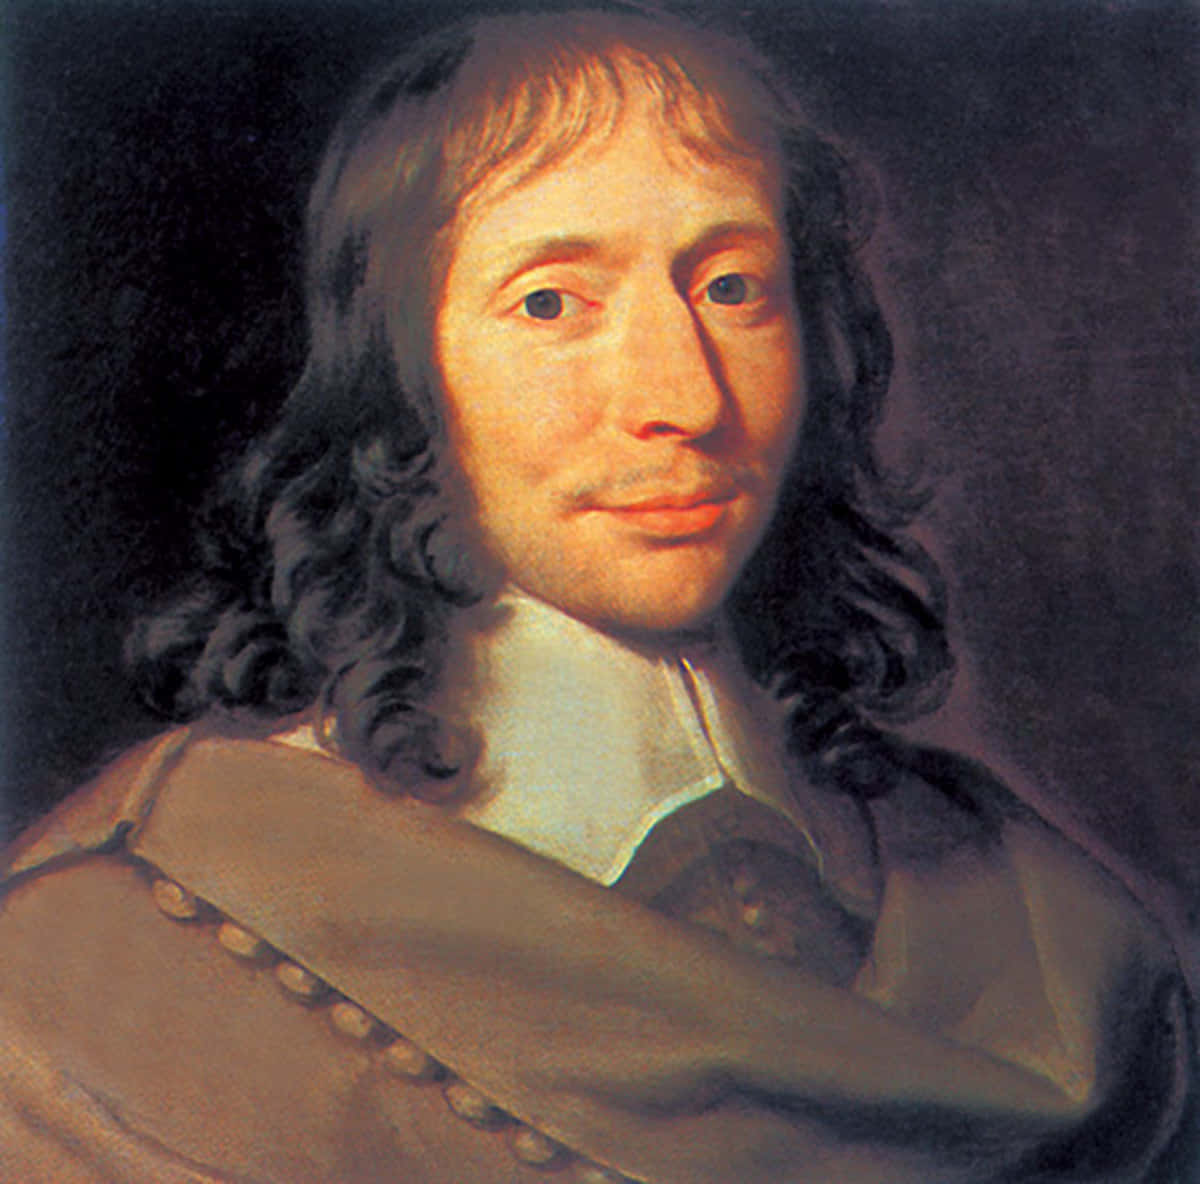 A Painting Of A Man With Long Hair